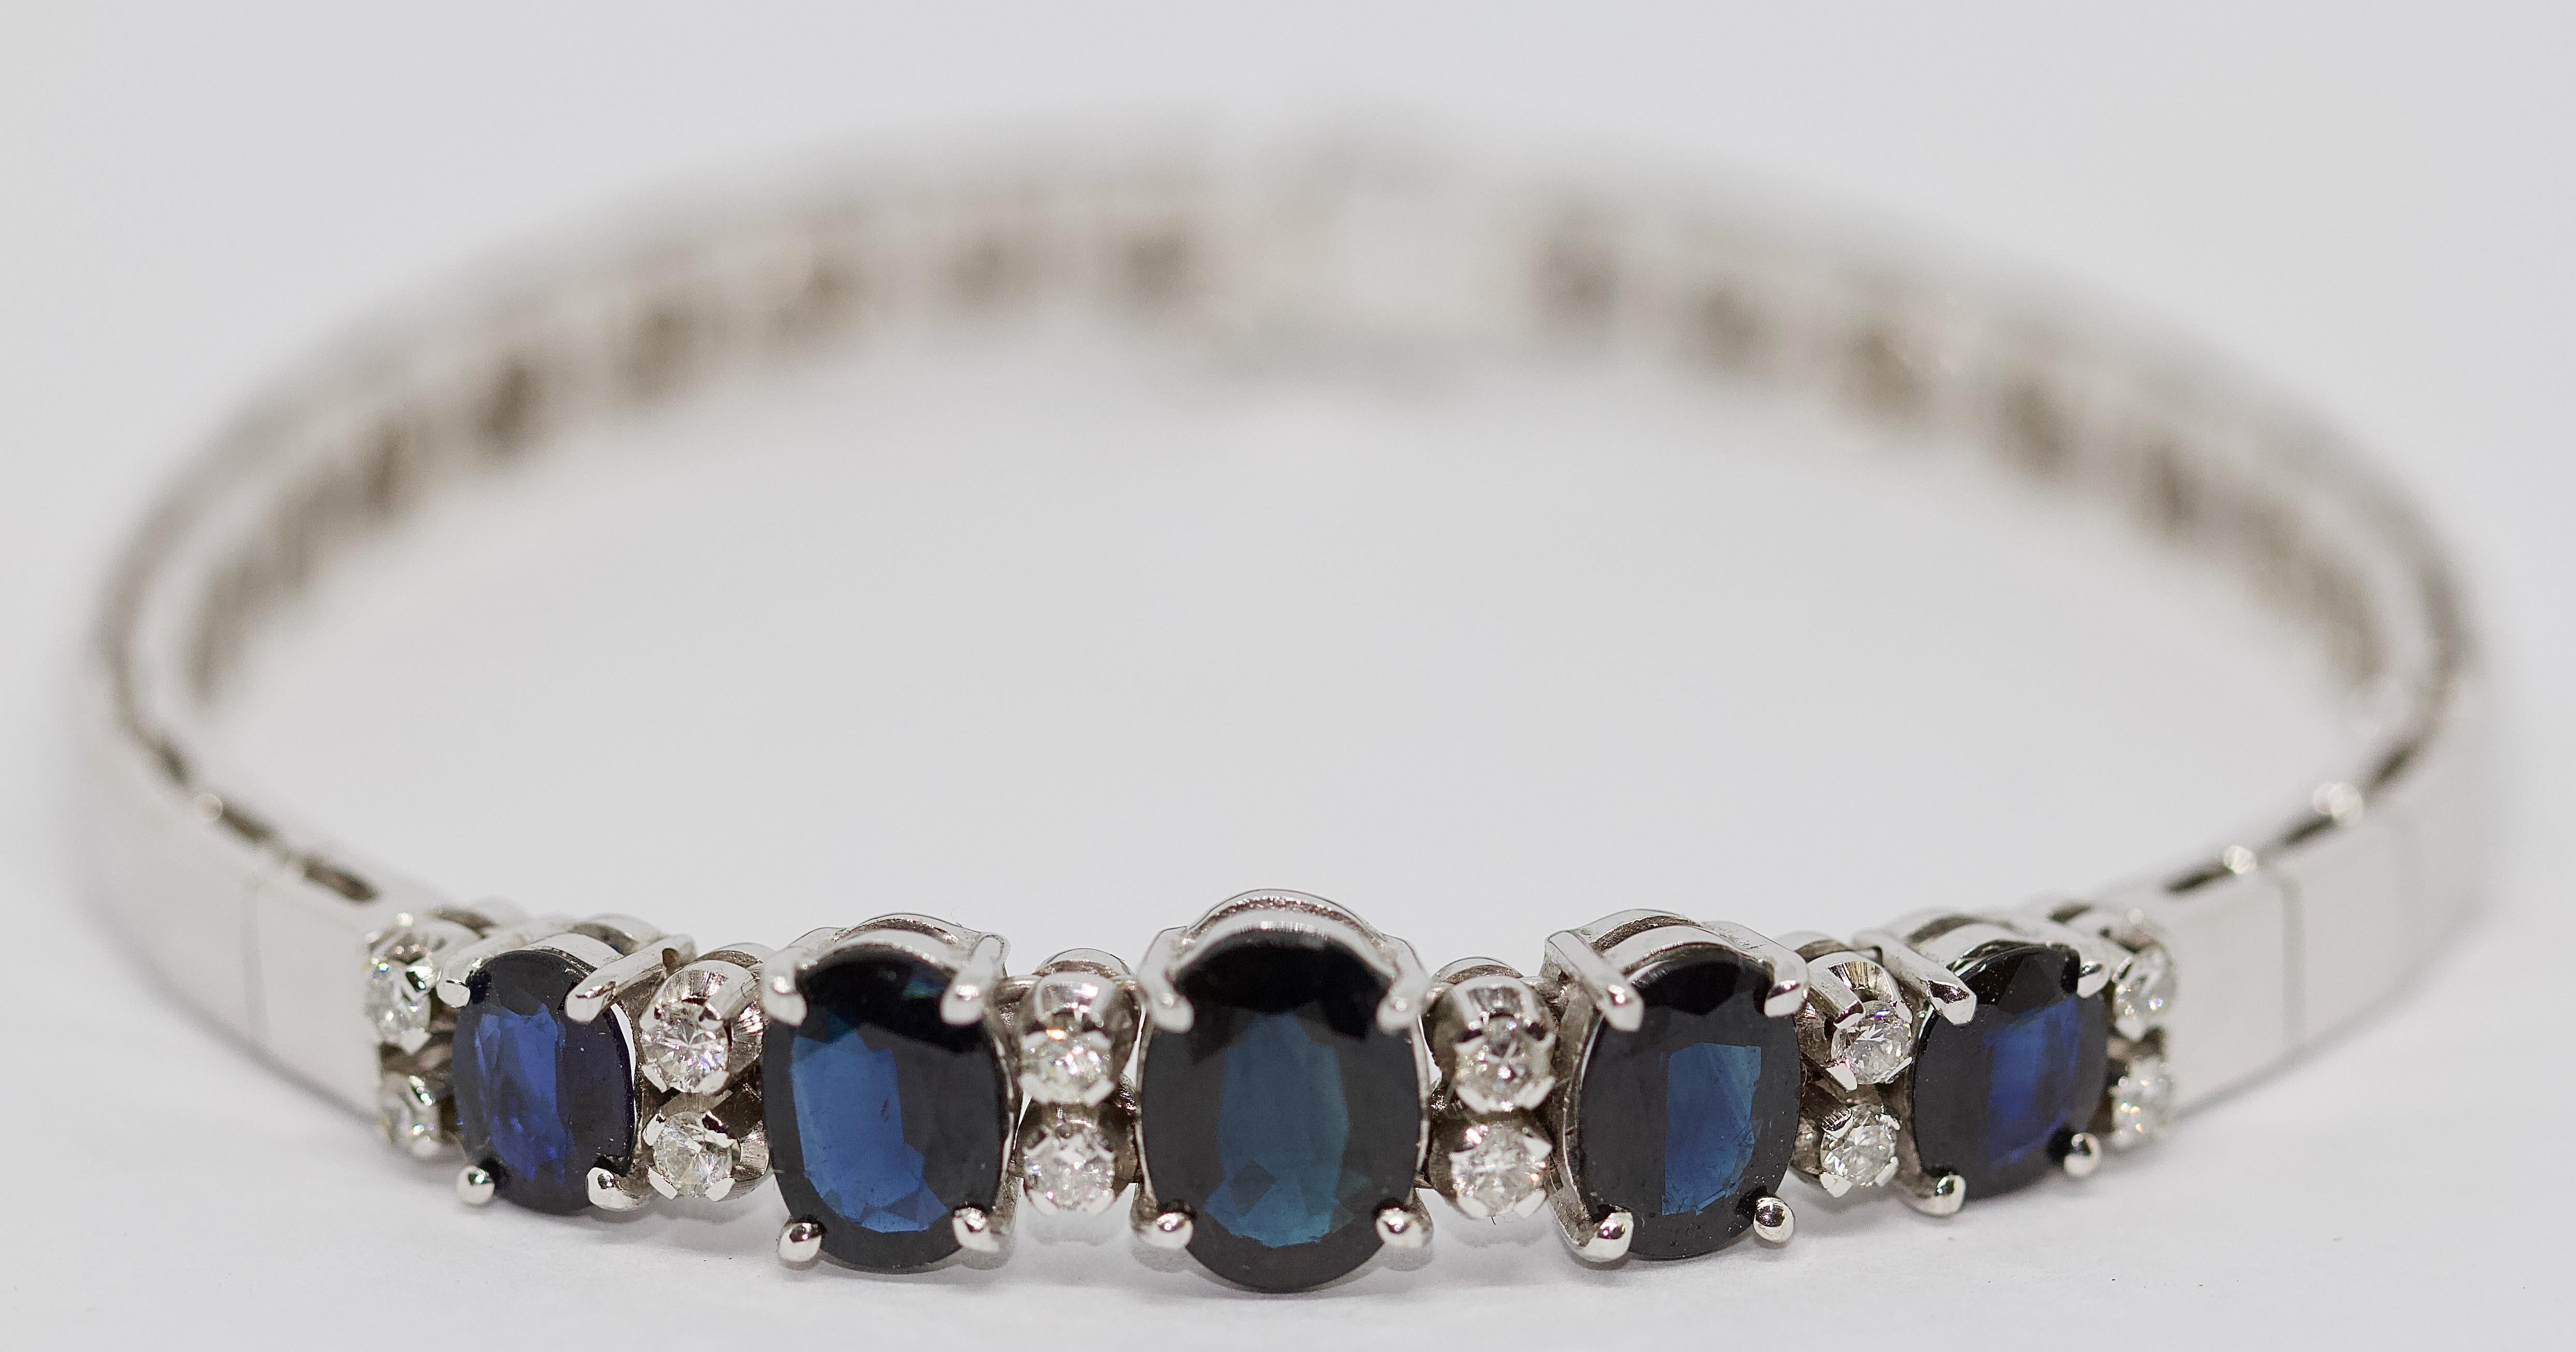 Ladies 18K White Gold Bracelet with Sapphires and Diamonds.


Bracelet is hallmarked.

Including certificate of authenticity.